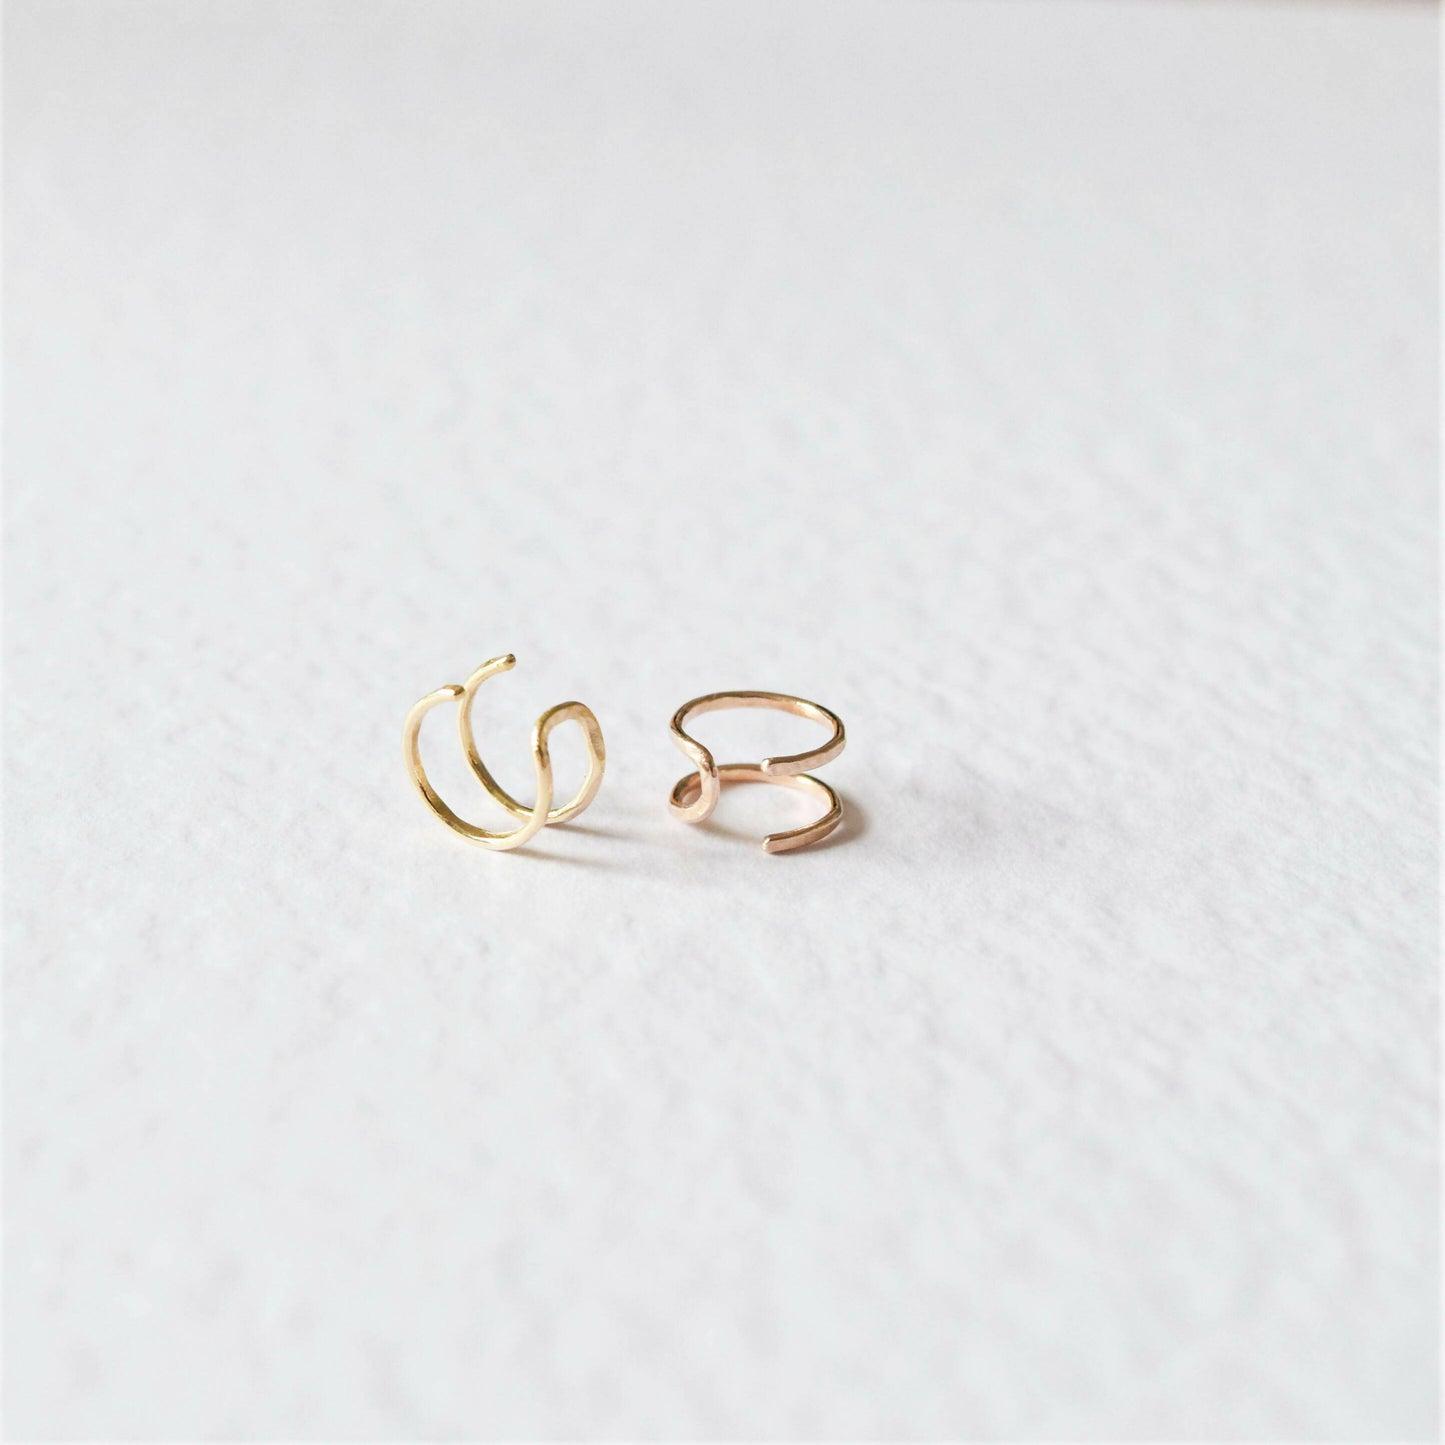 Double Helix Cuff (9ct gold or 9ct rose gold)